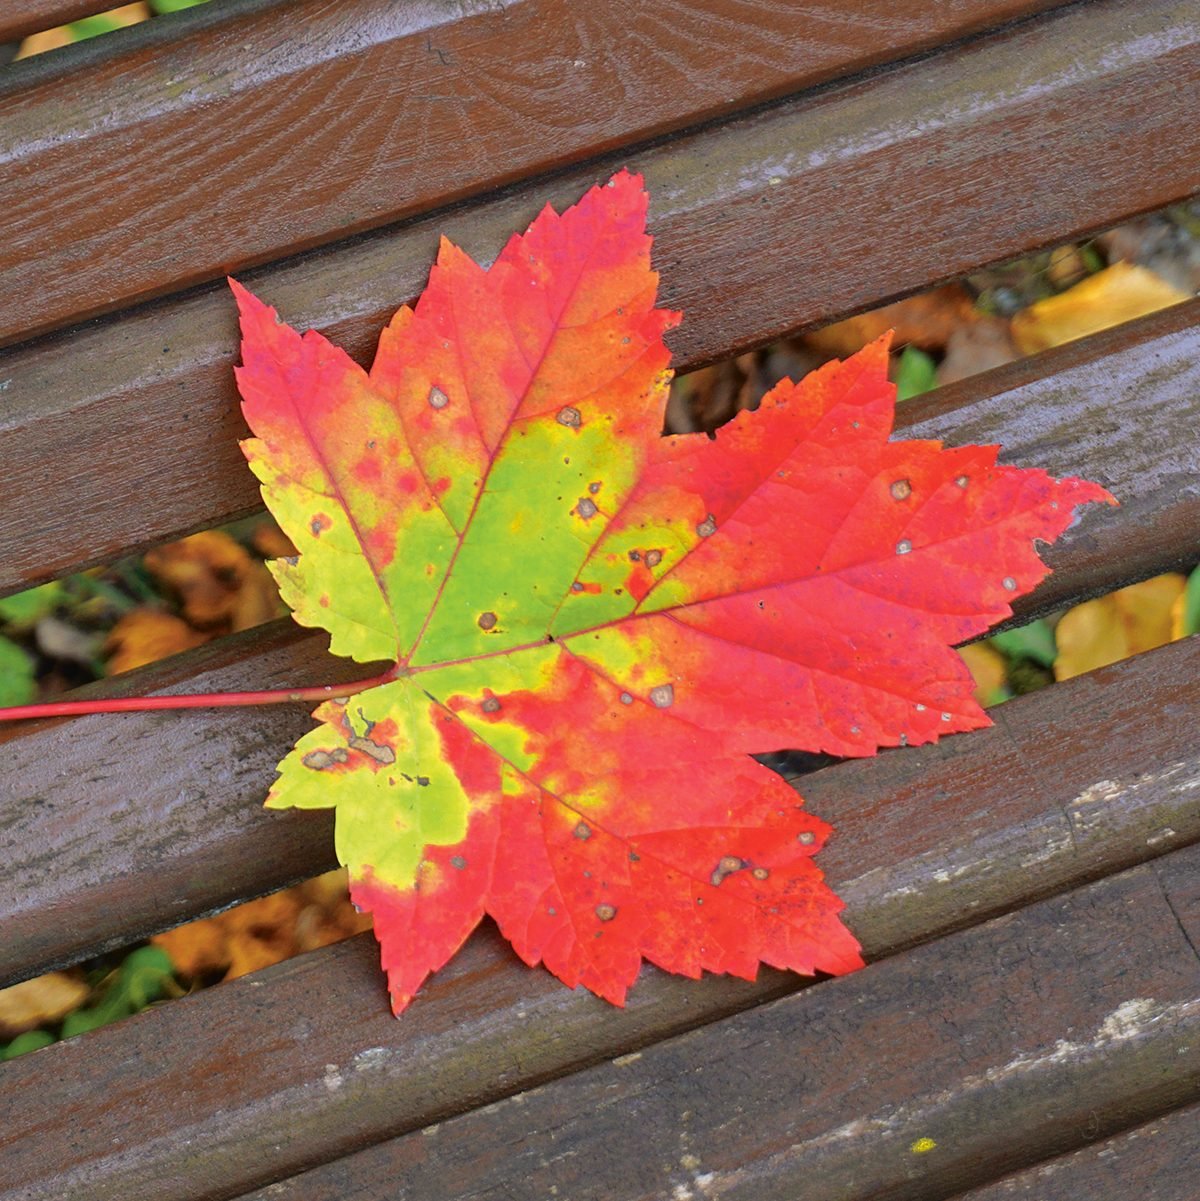 Autumn in Canada - green orange and red maple leaf